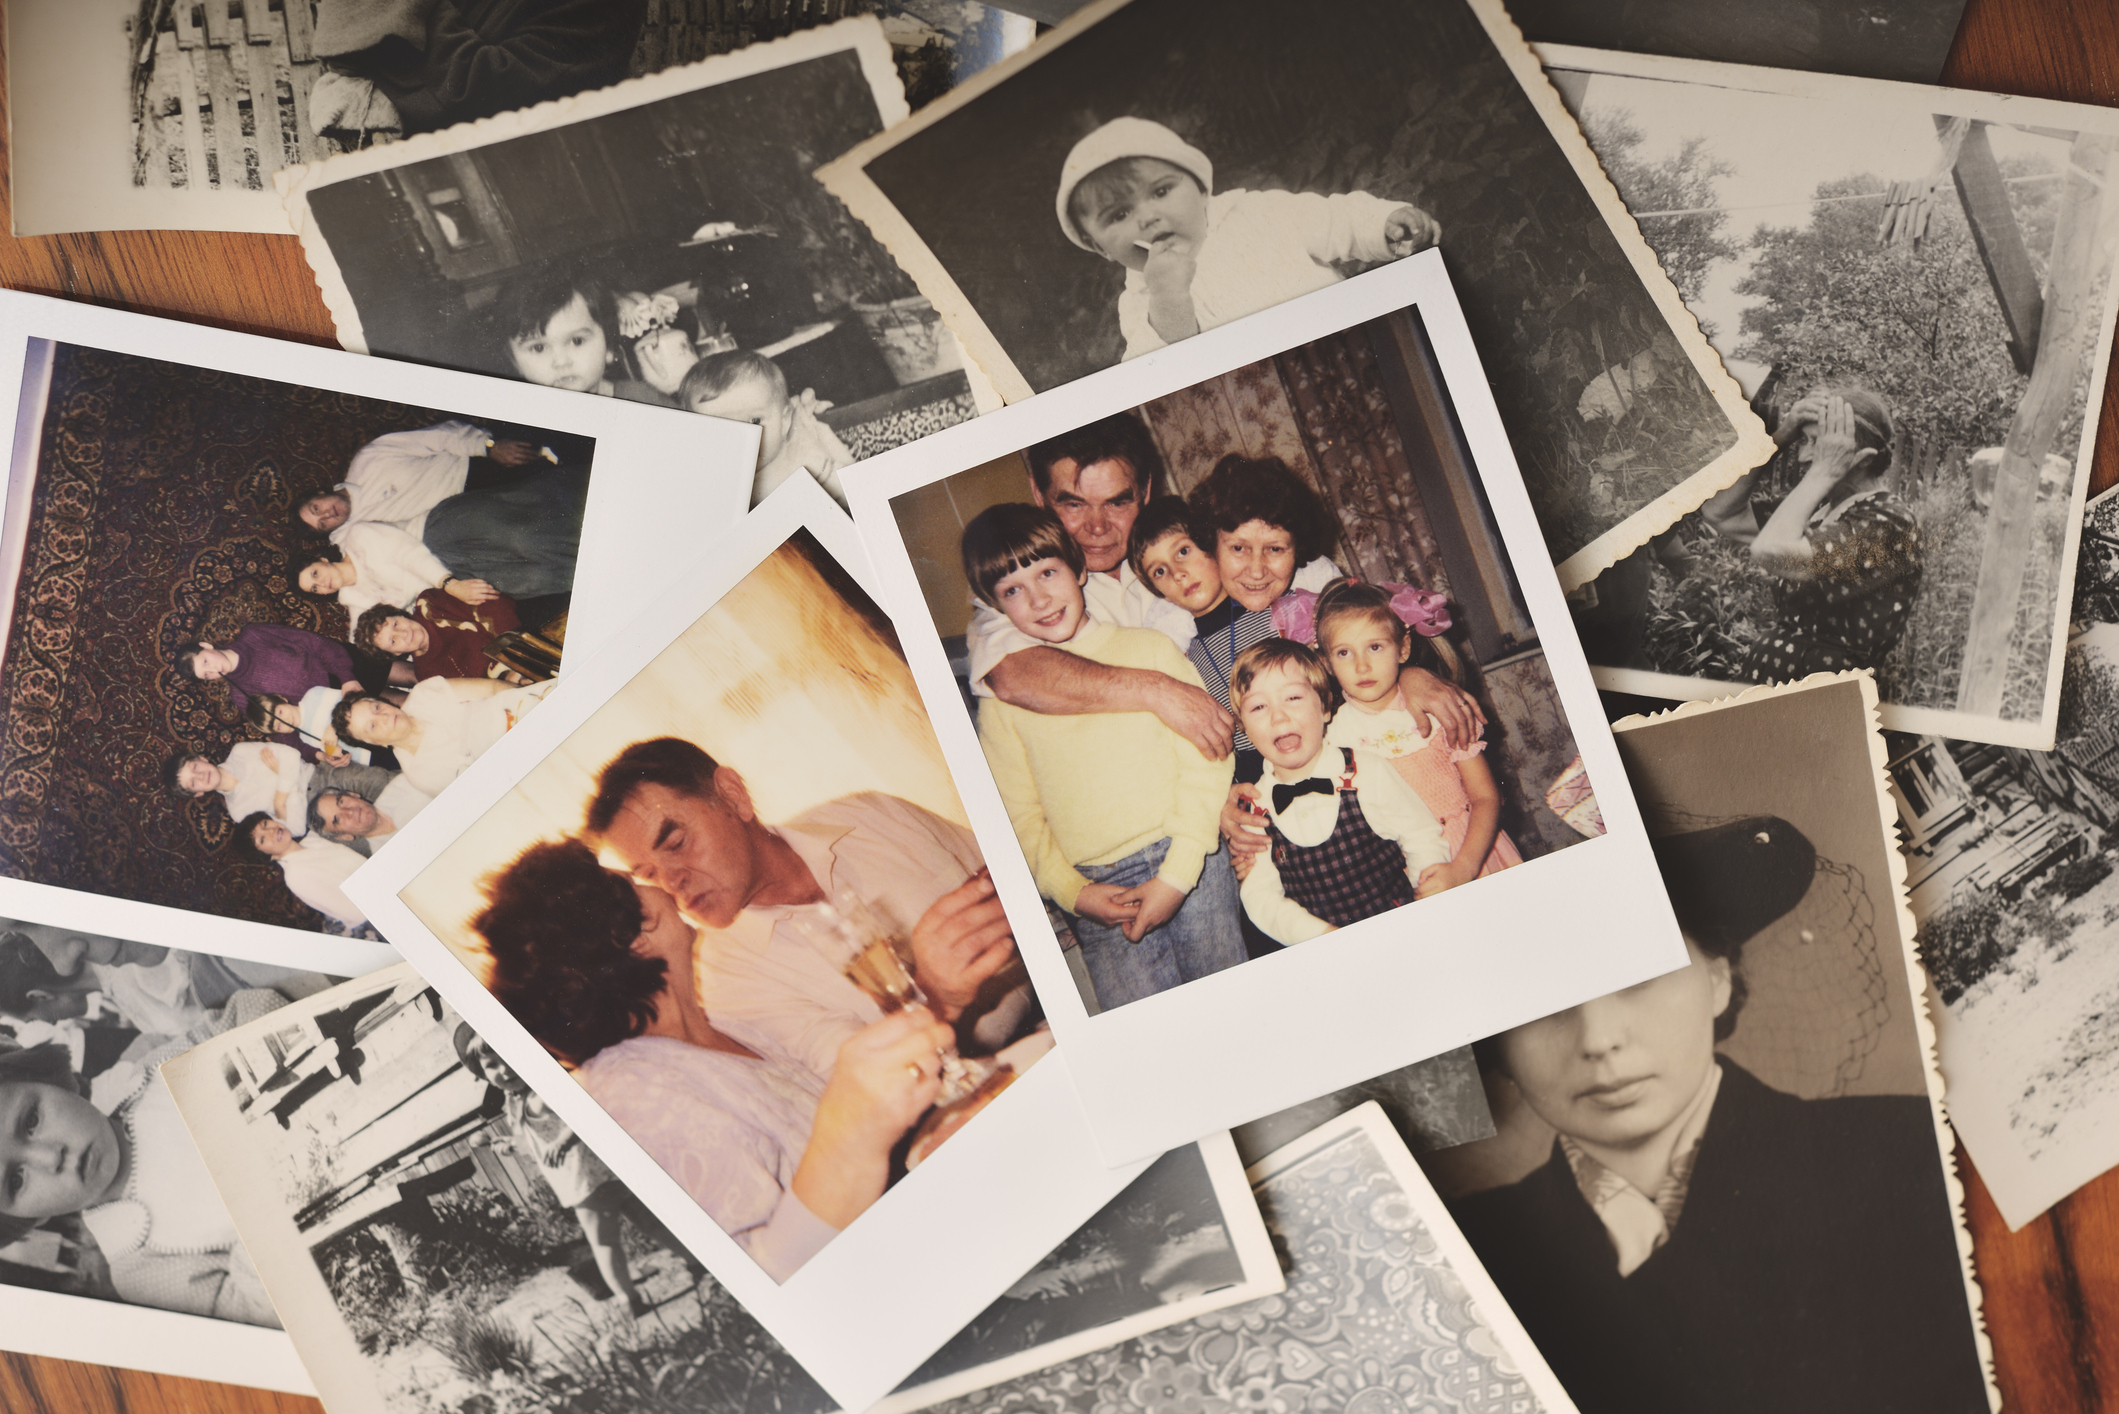 Assorted old photographs spread out, showcasing various stages of family life and relationships